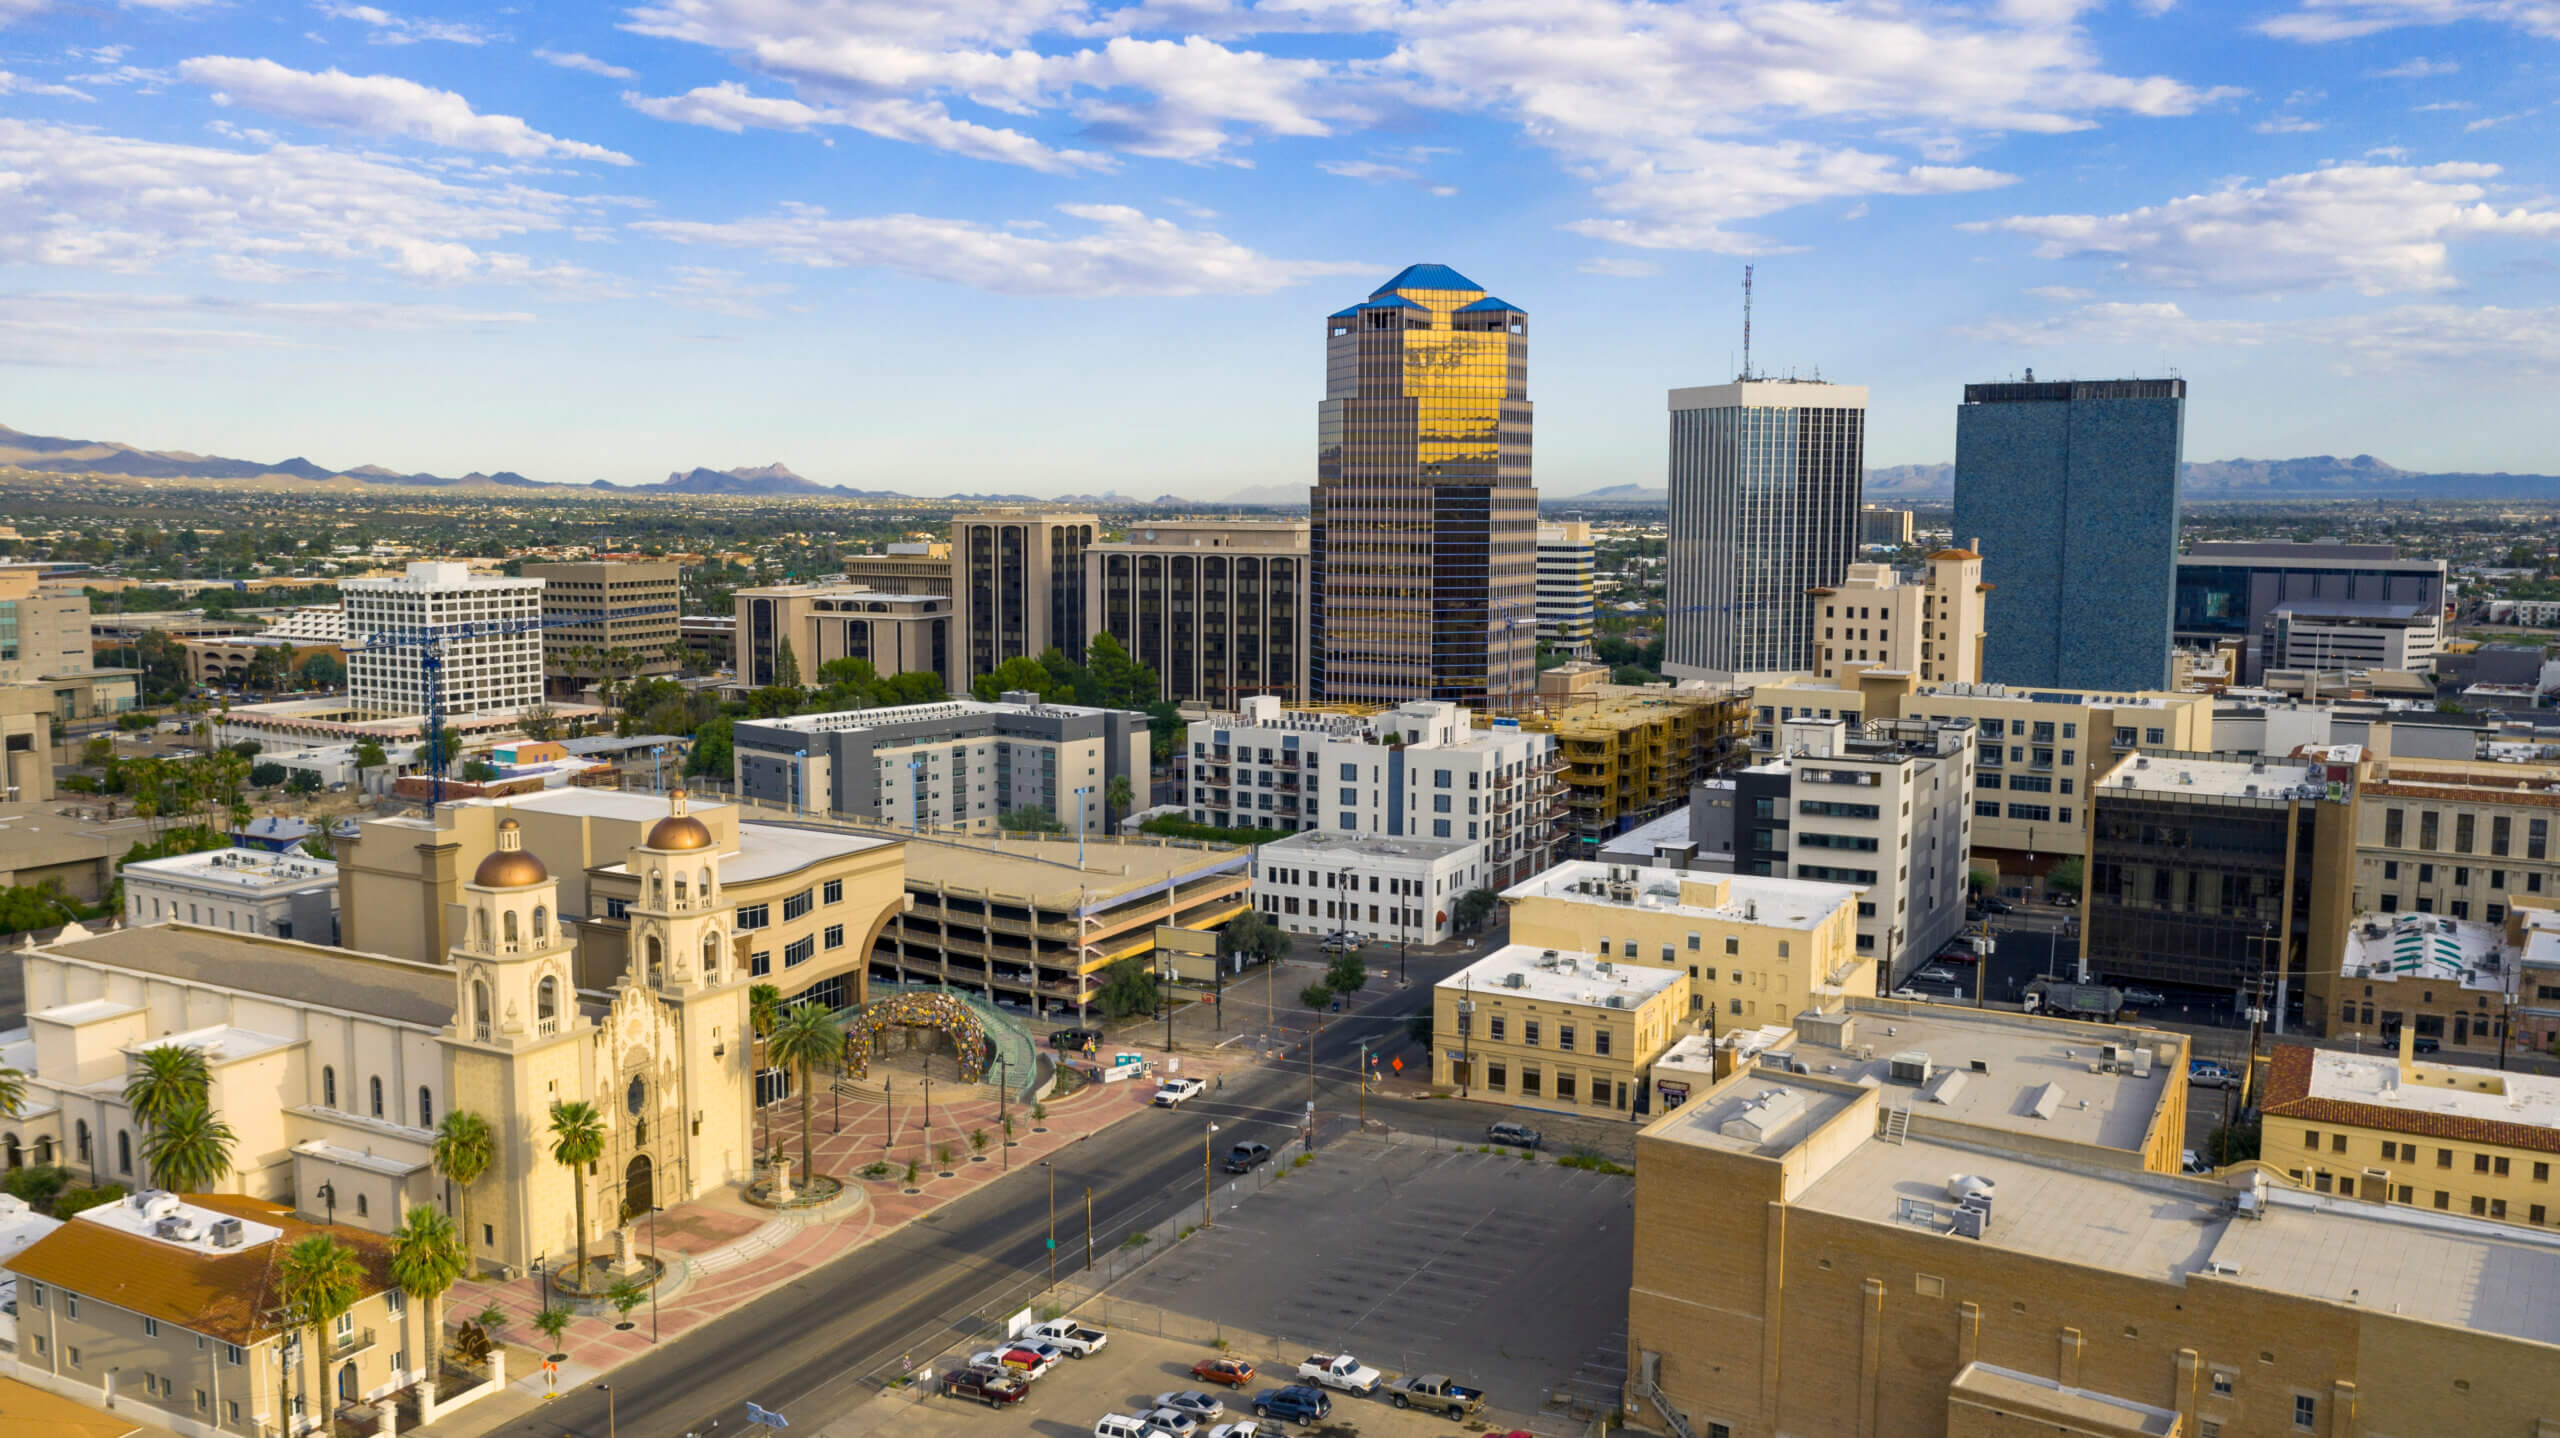 An aerial view of Tucson during the day with a blue sky